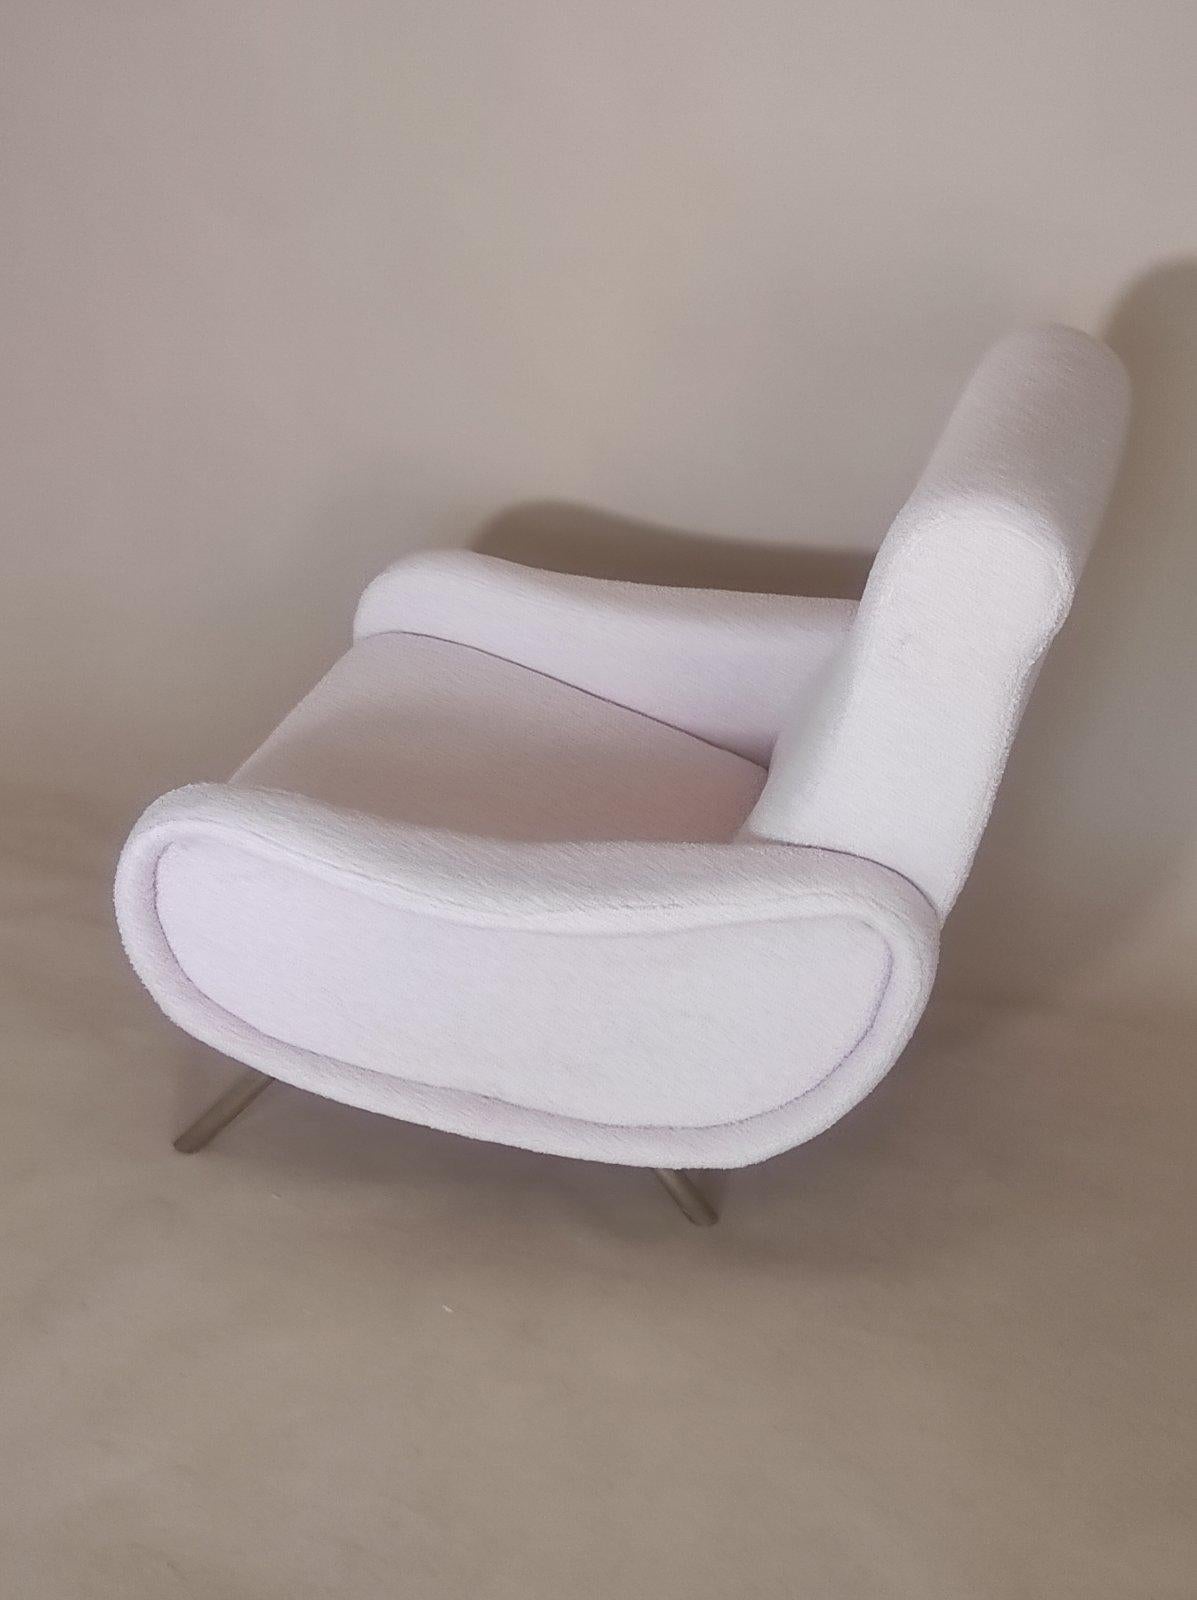 Mid-Century Modern Marco Zanuso Lady Chair 1950s For Sale